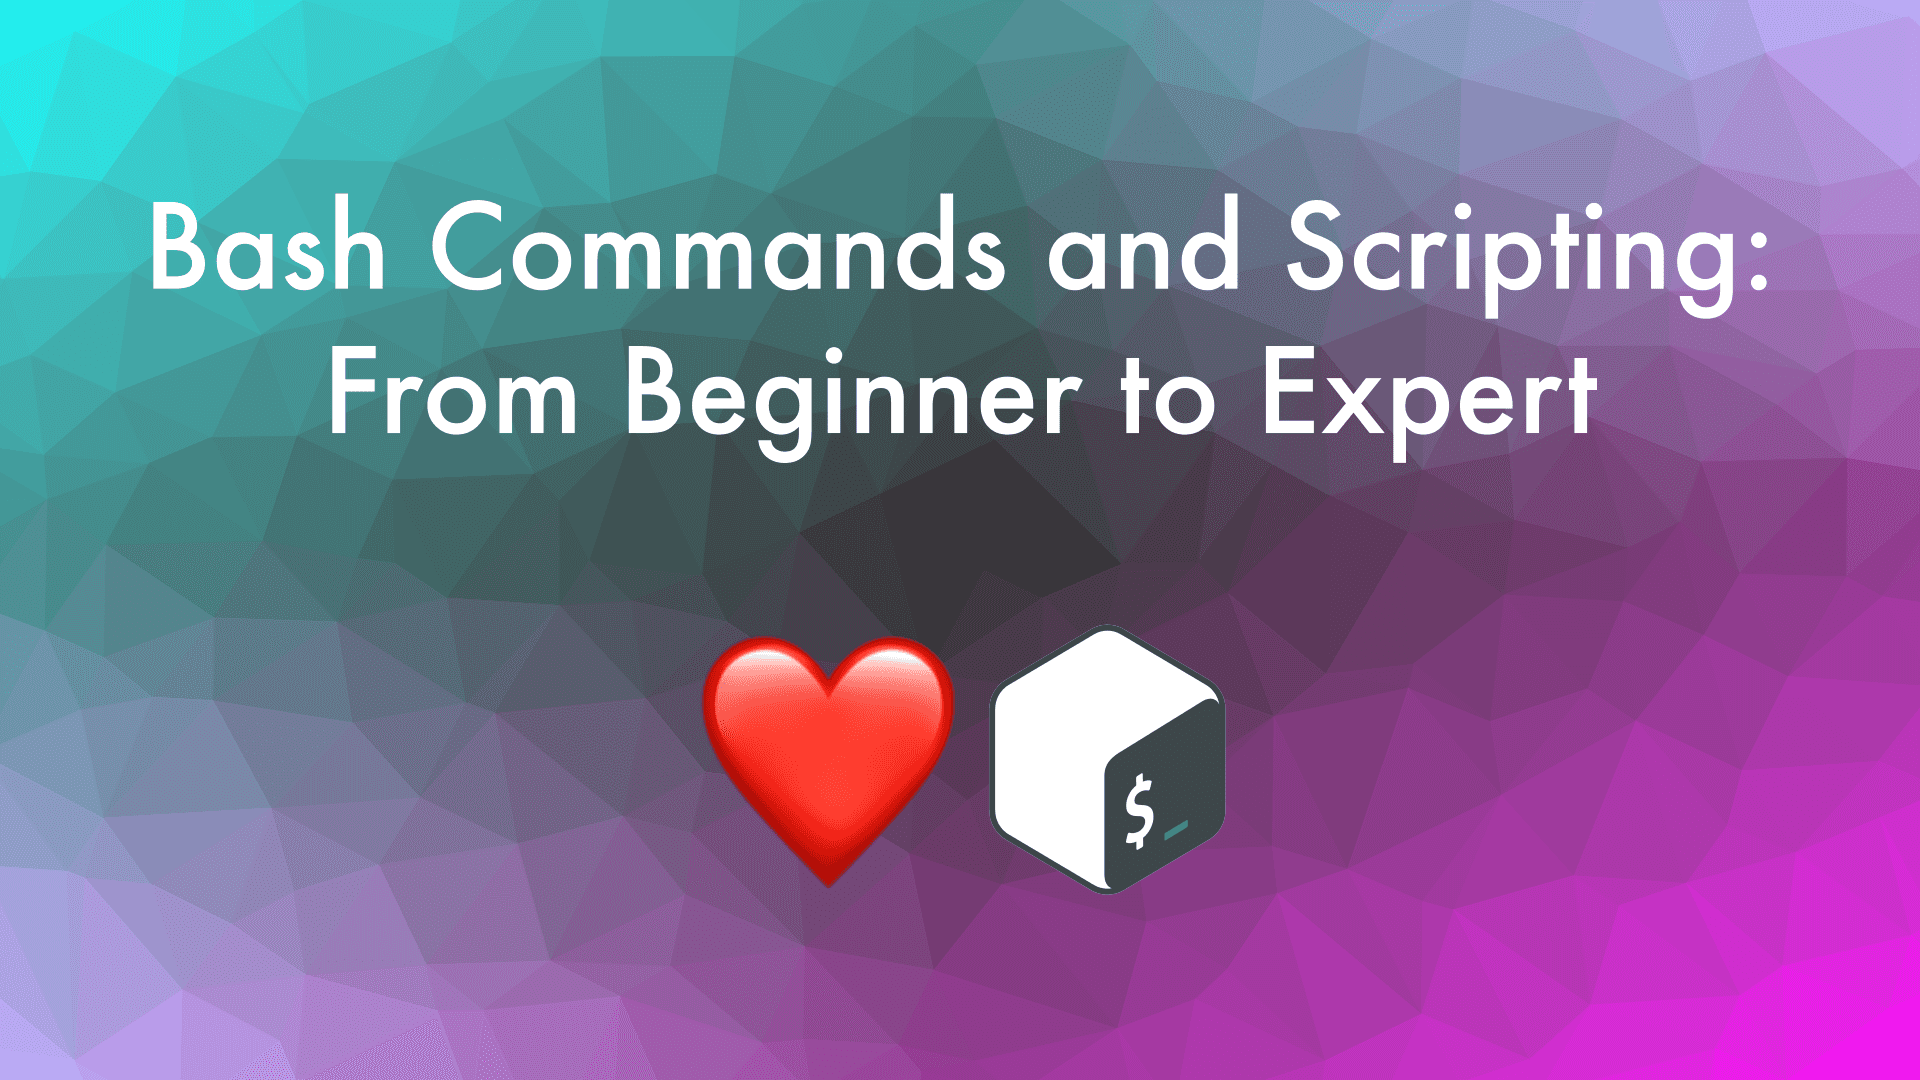 My Udemy course "Bash Commands and Scripting: From Beginner to Expert".